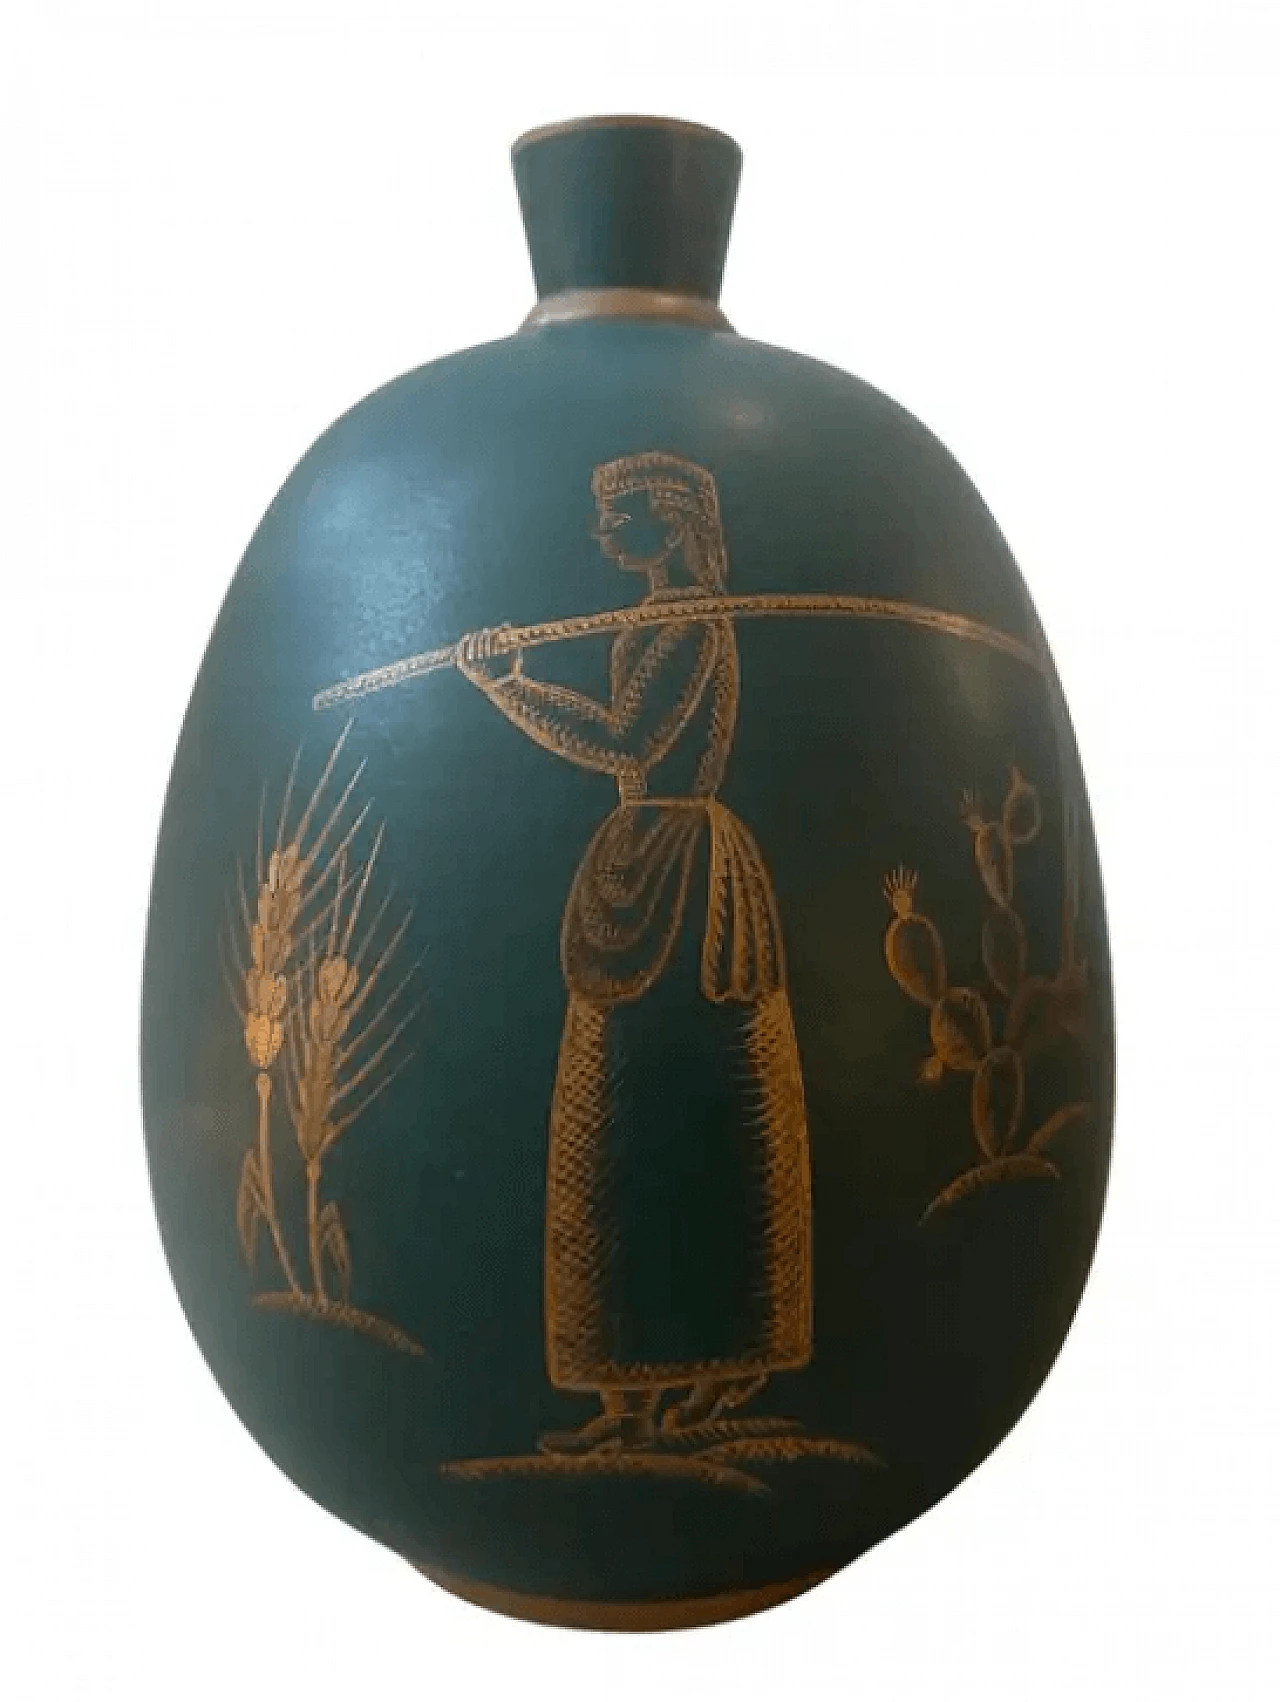 Sicilian vase in green and gold ceramic by Gio Ponti, 1930s 1